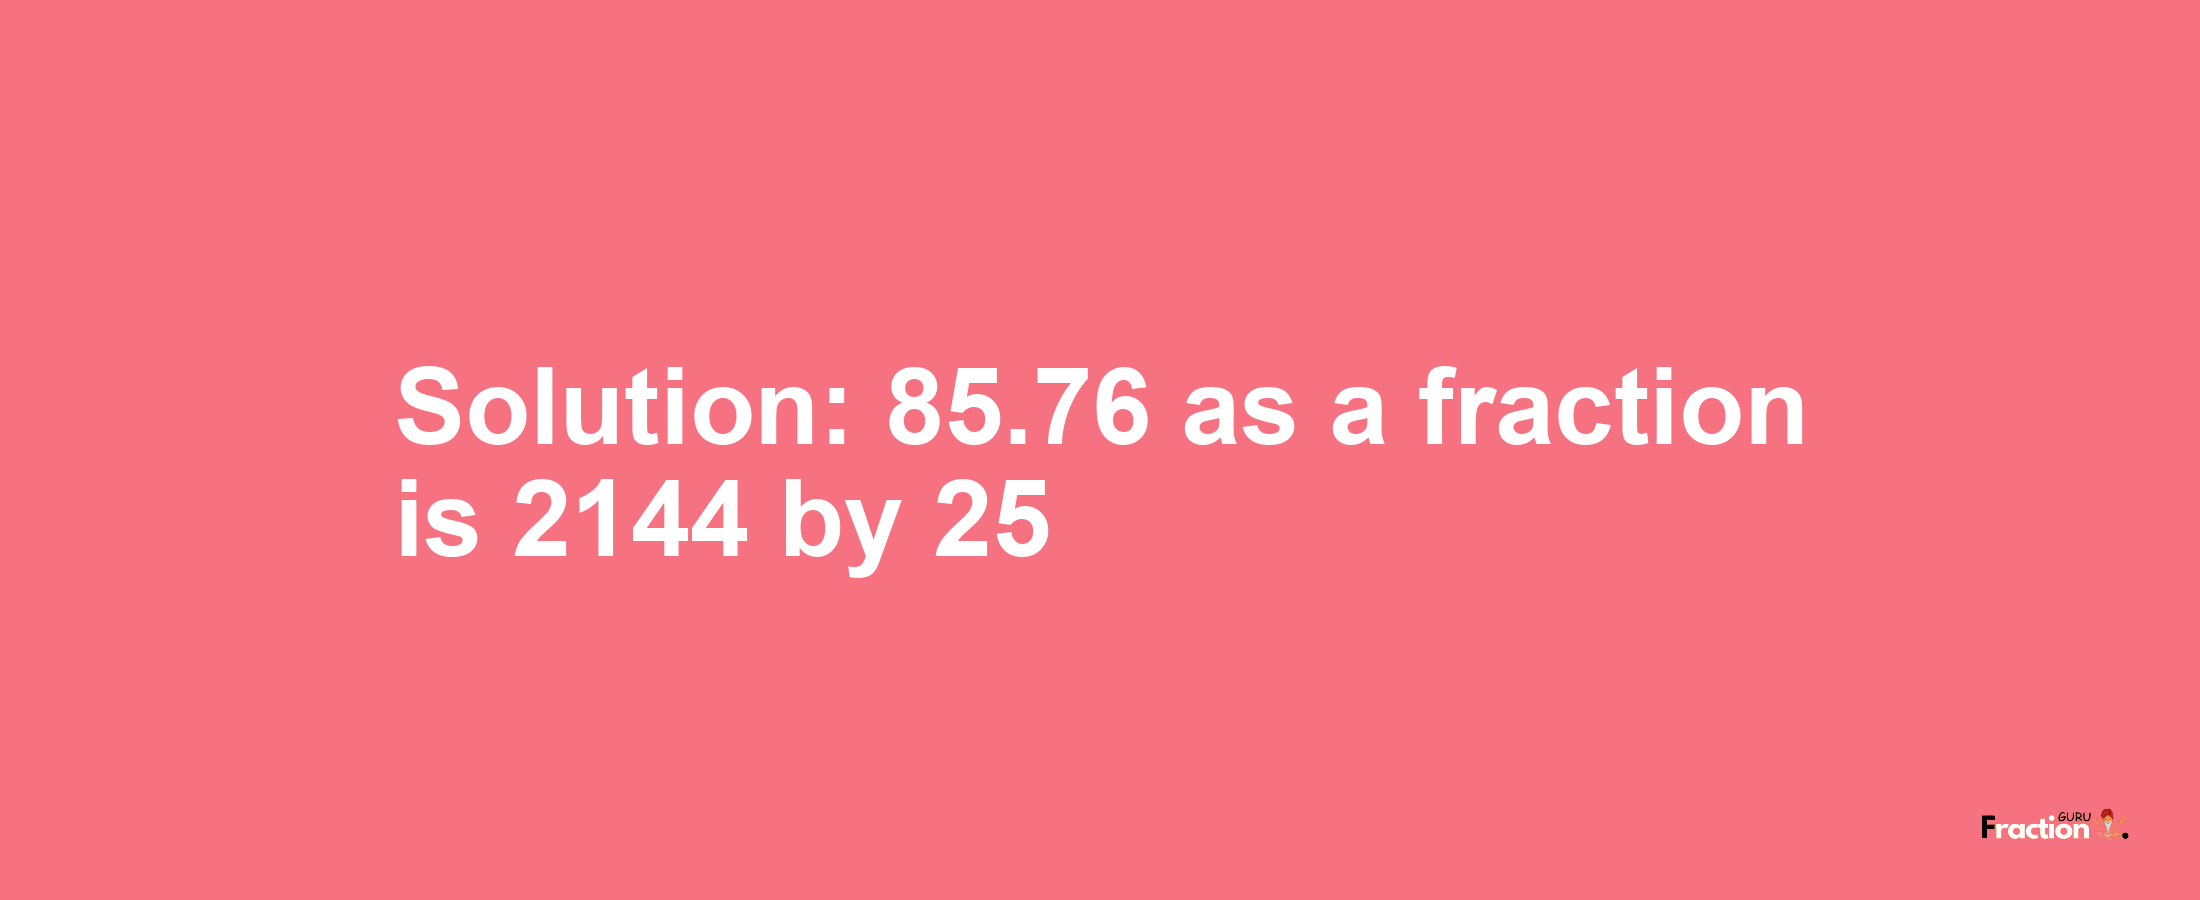 Solution:85.76 as a fraction is 2144/25